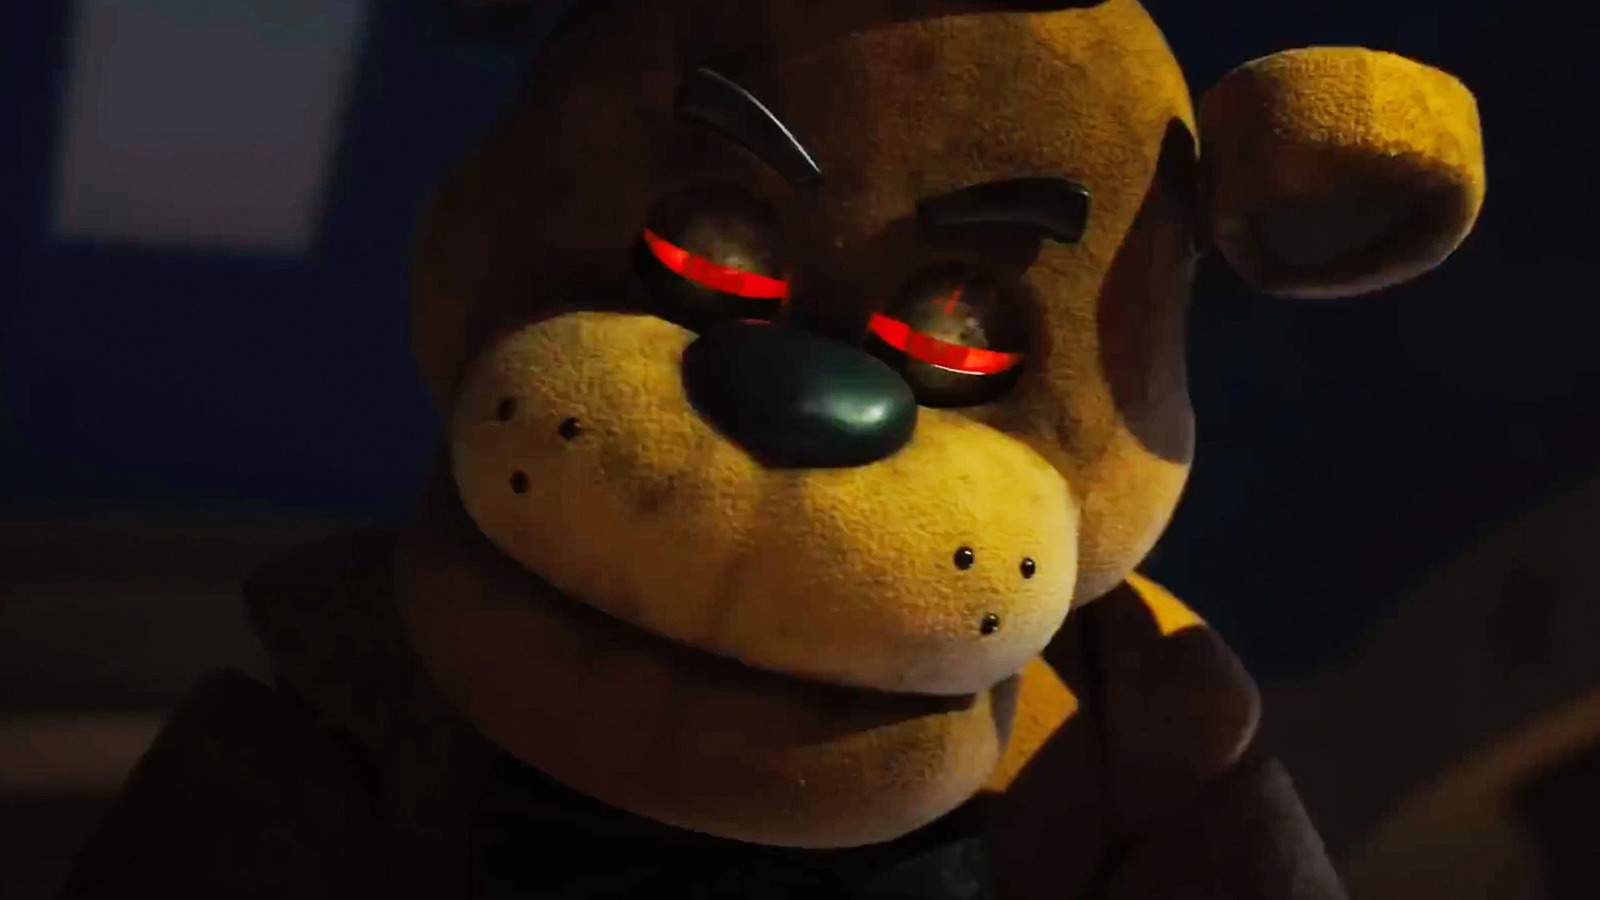 How Five Nights at Freddy's Adapts a Video Game